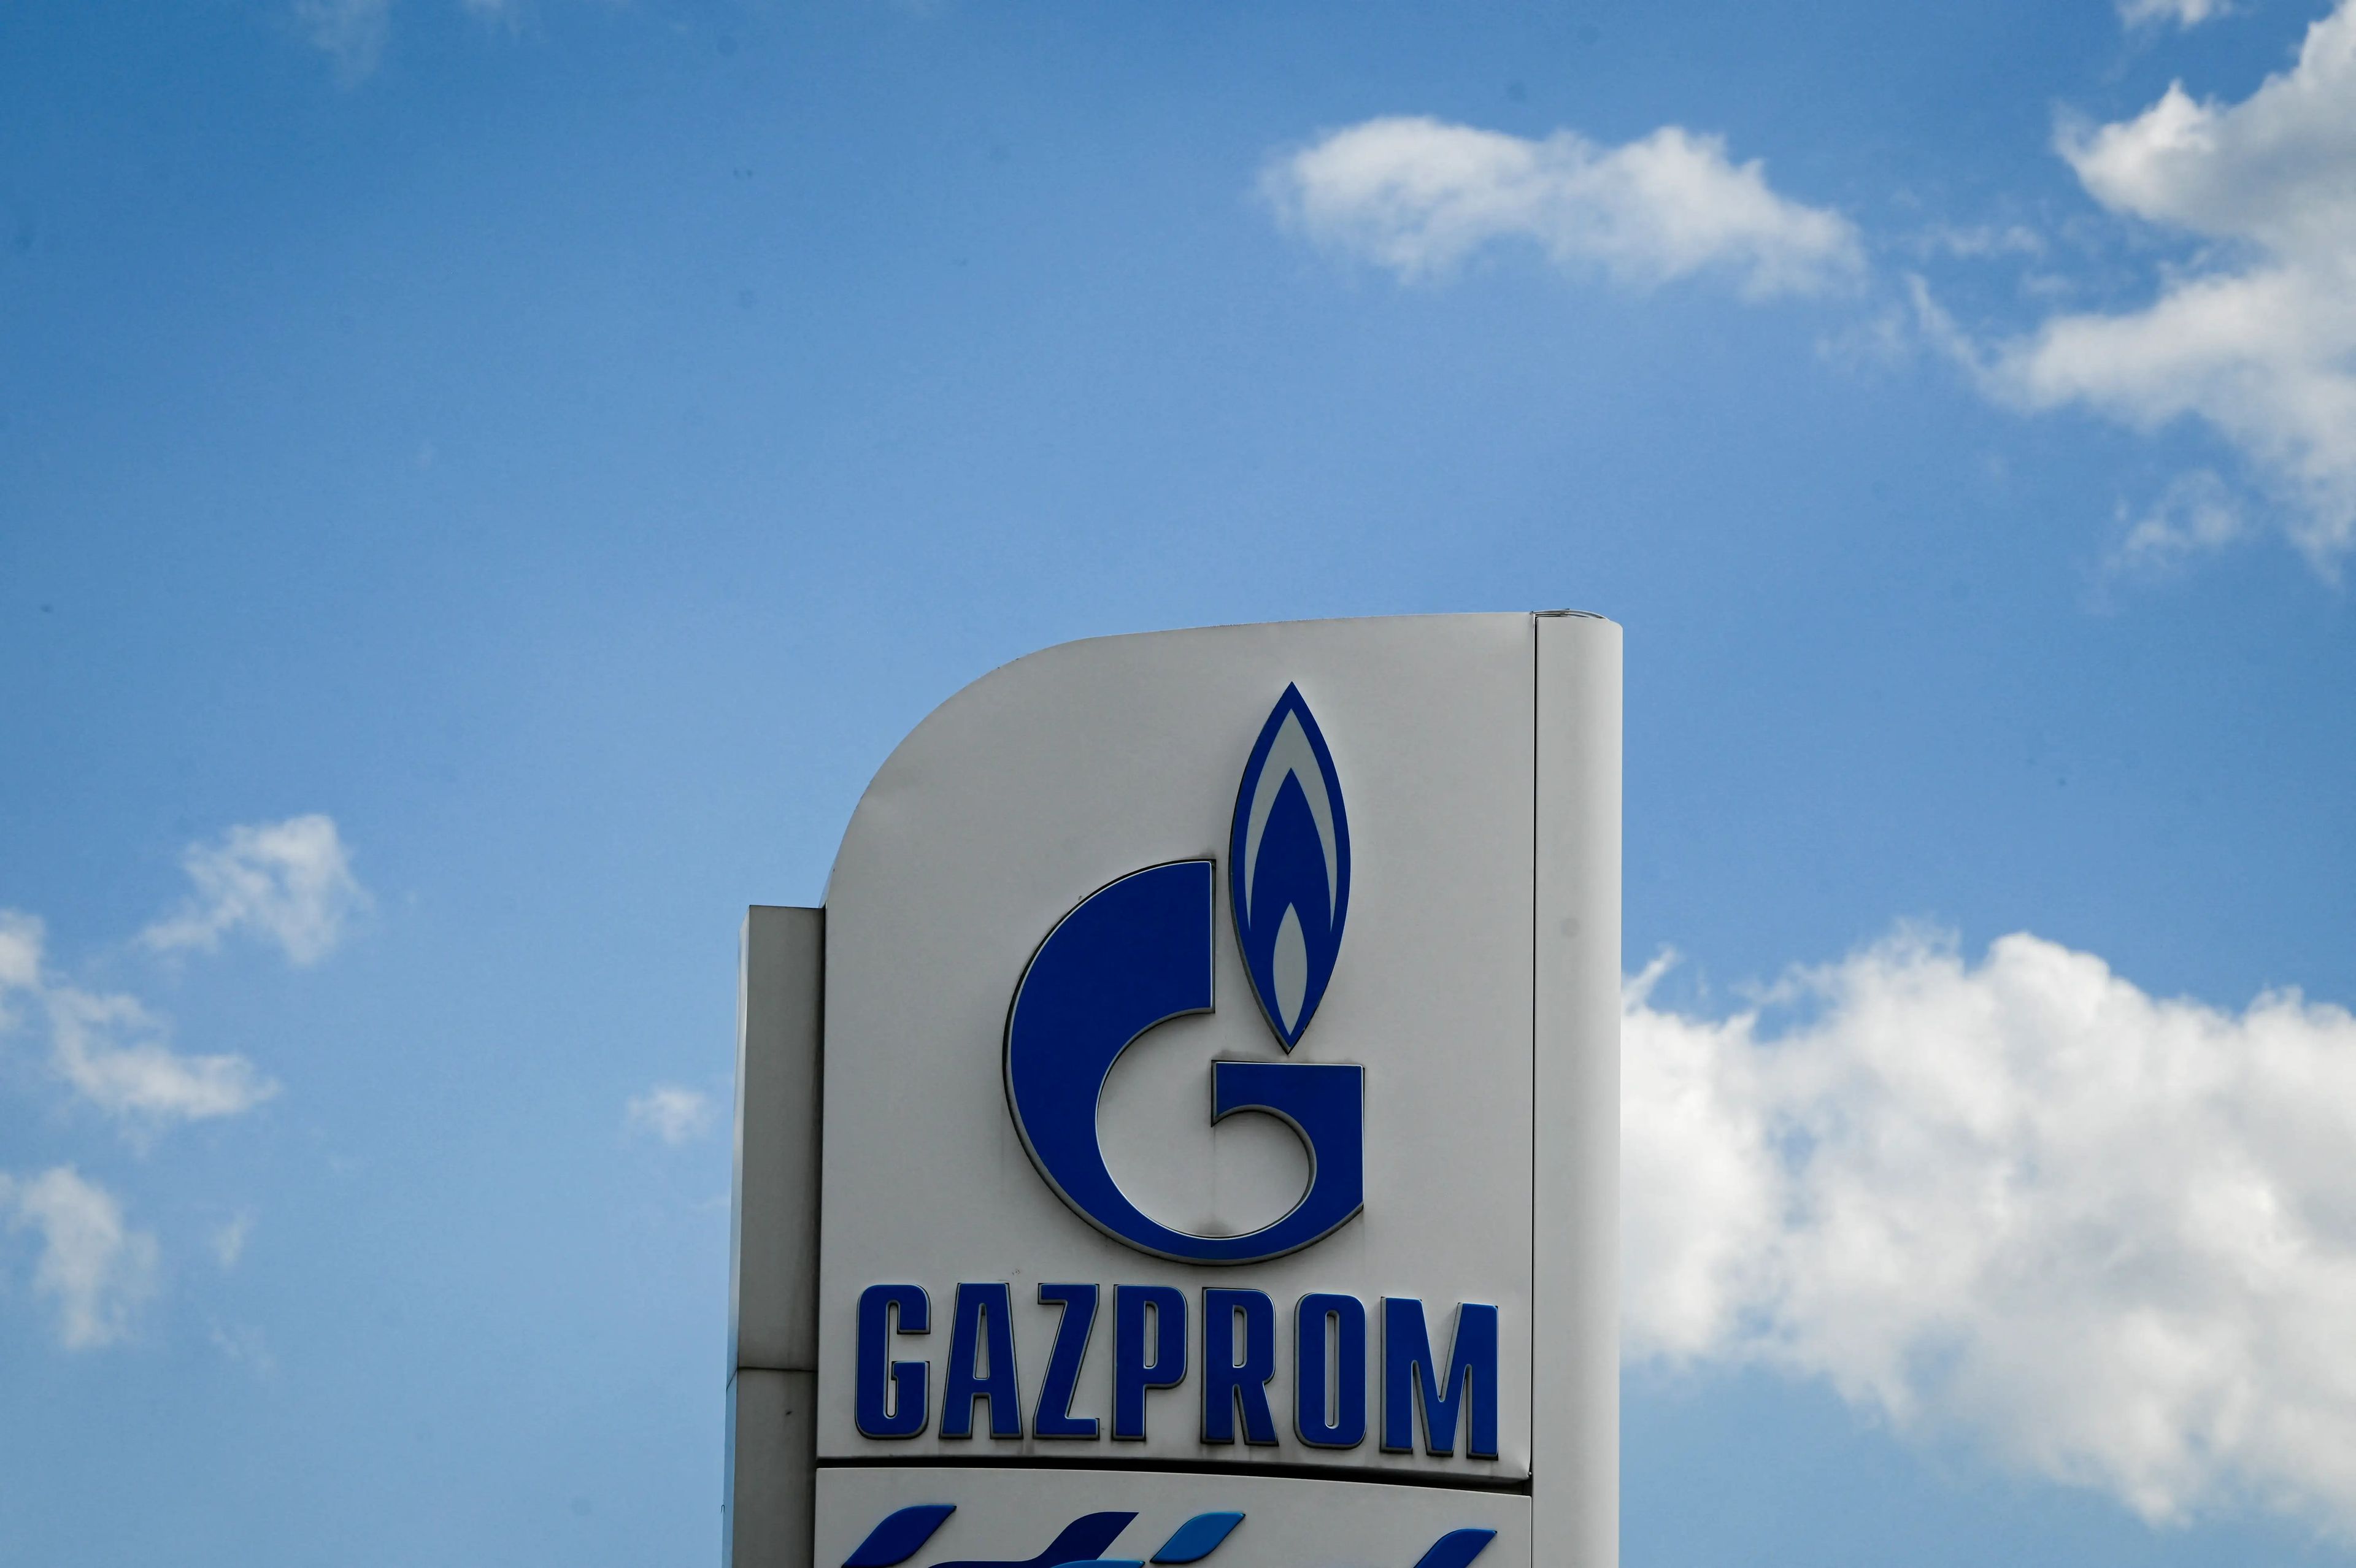 The logo of Russia's energy giant Gazprom is pictured at one of its petrol stations in Sofia on April 27, 2022.